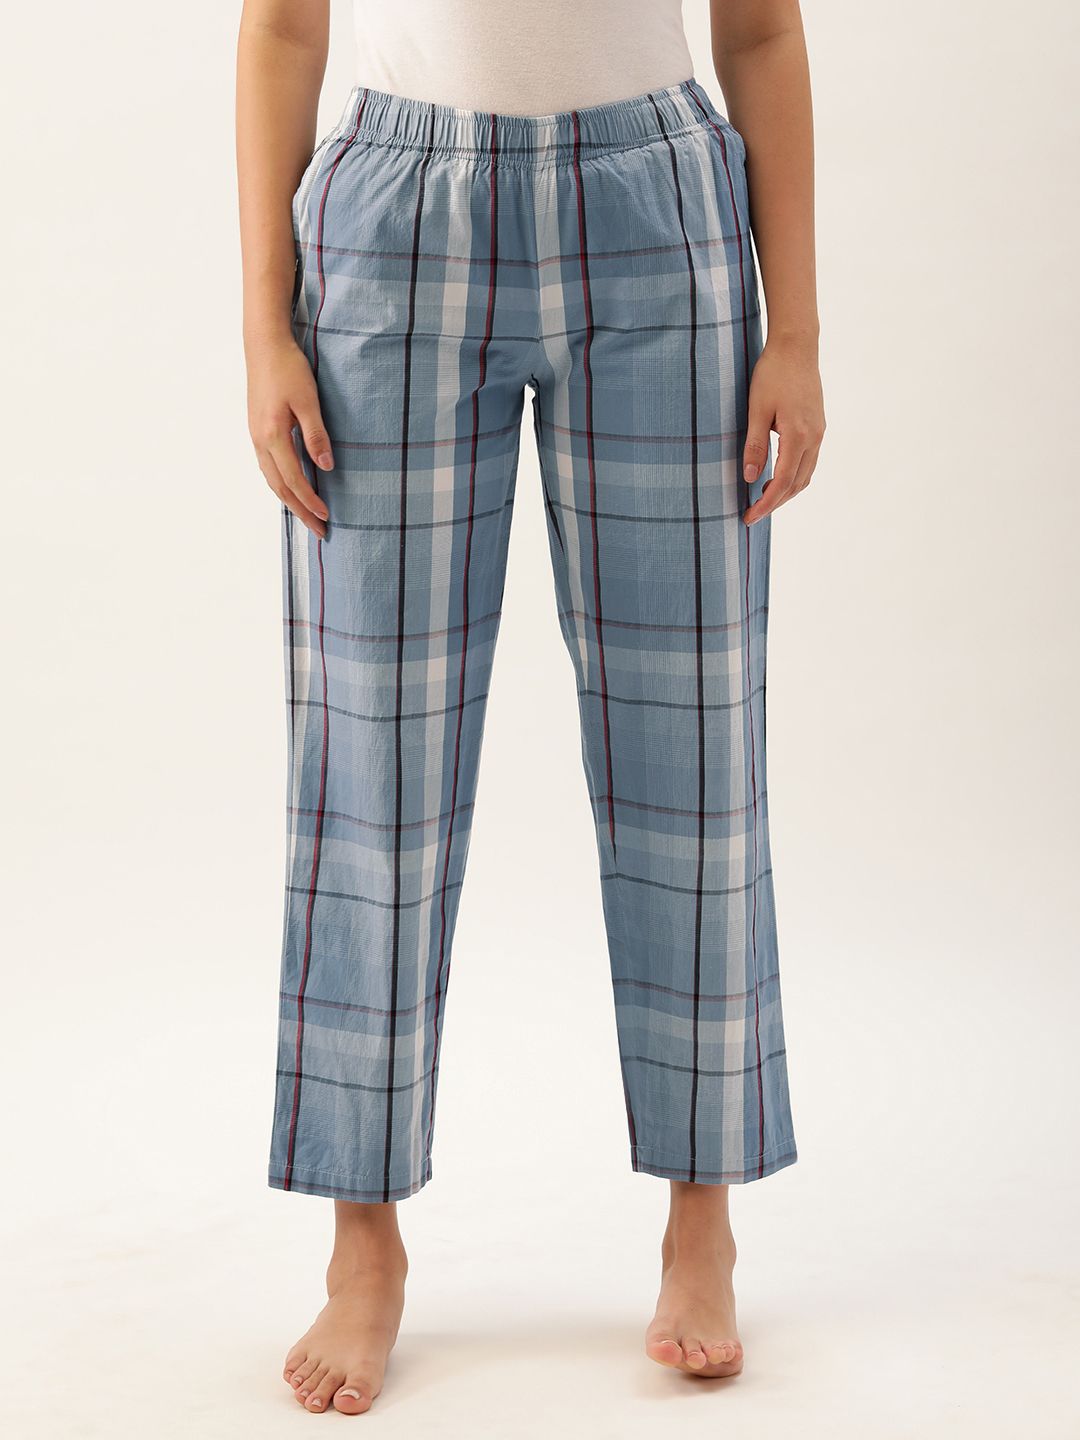 Clt.s Women Blue & White Pure Cotton Checked Lounge Pants Price in India